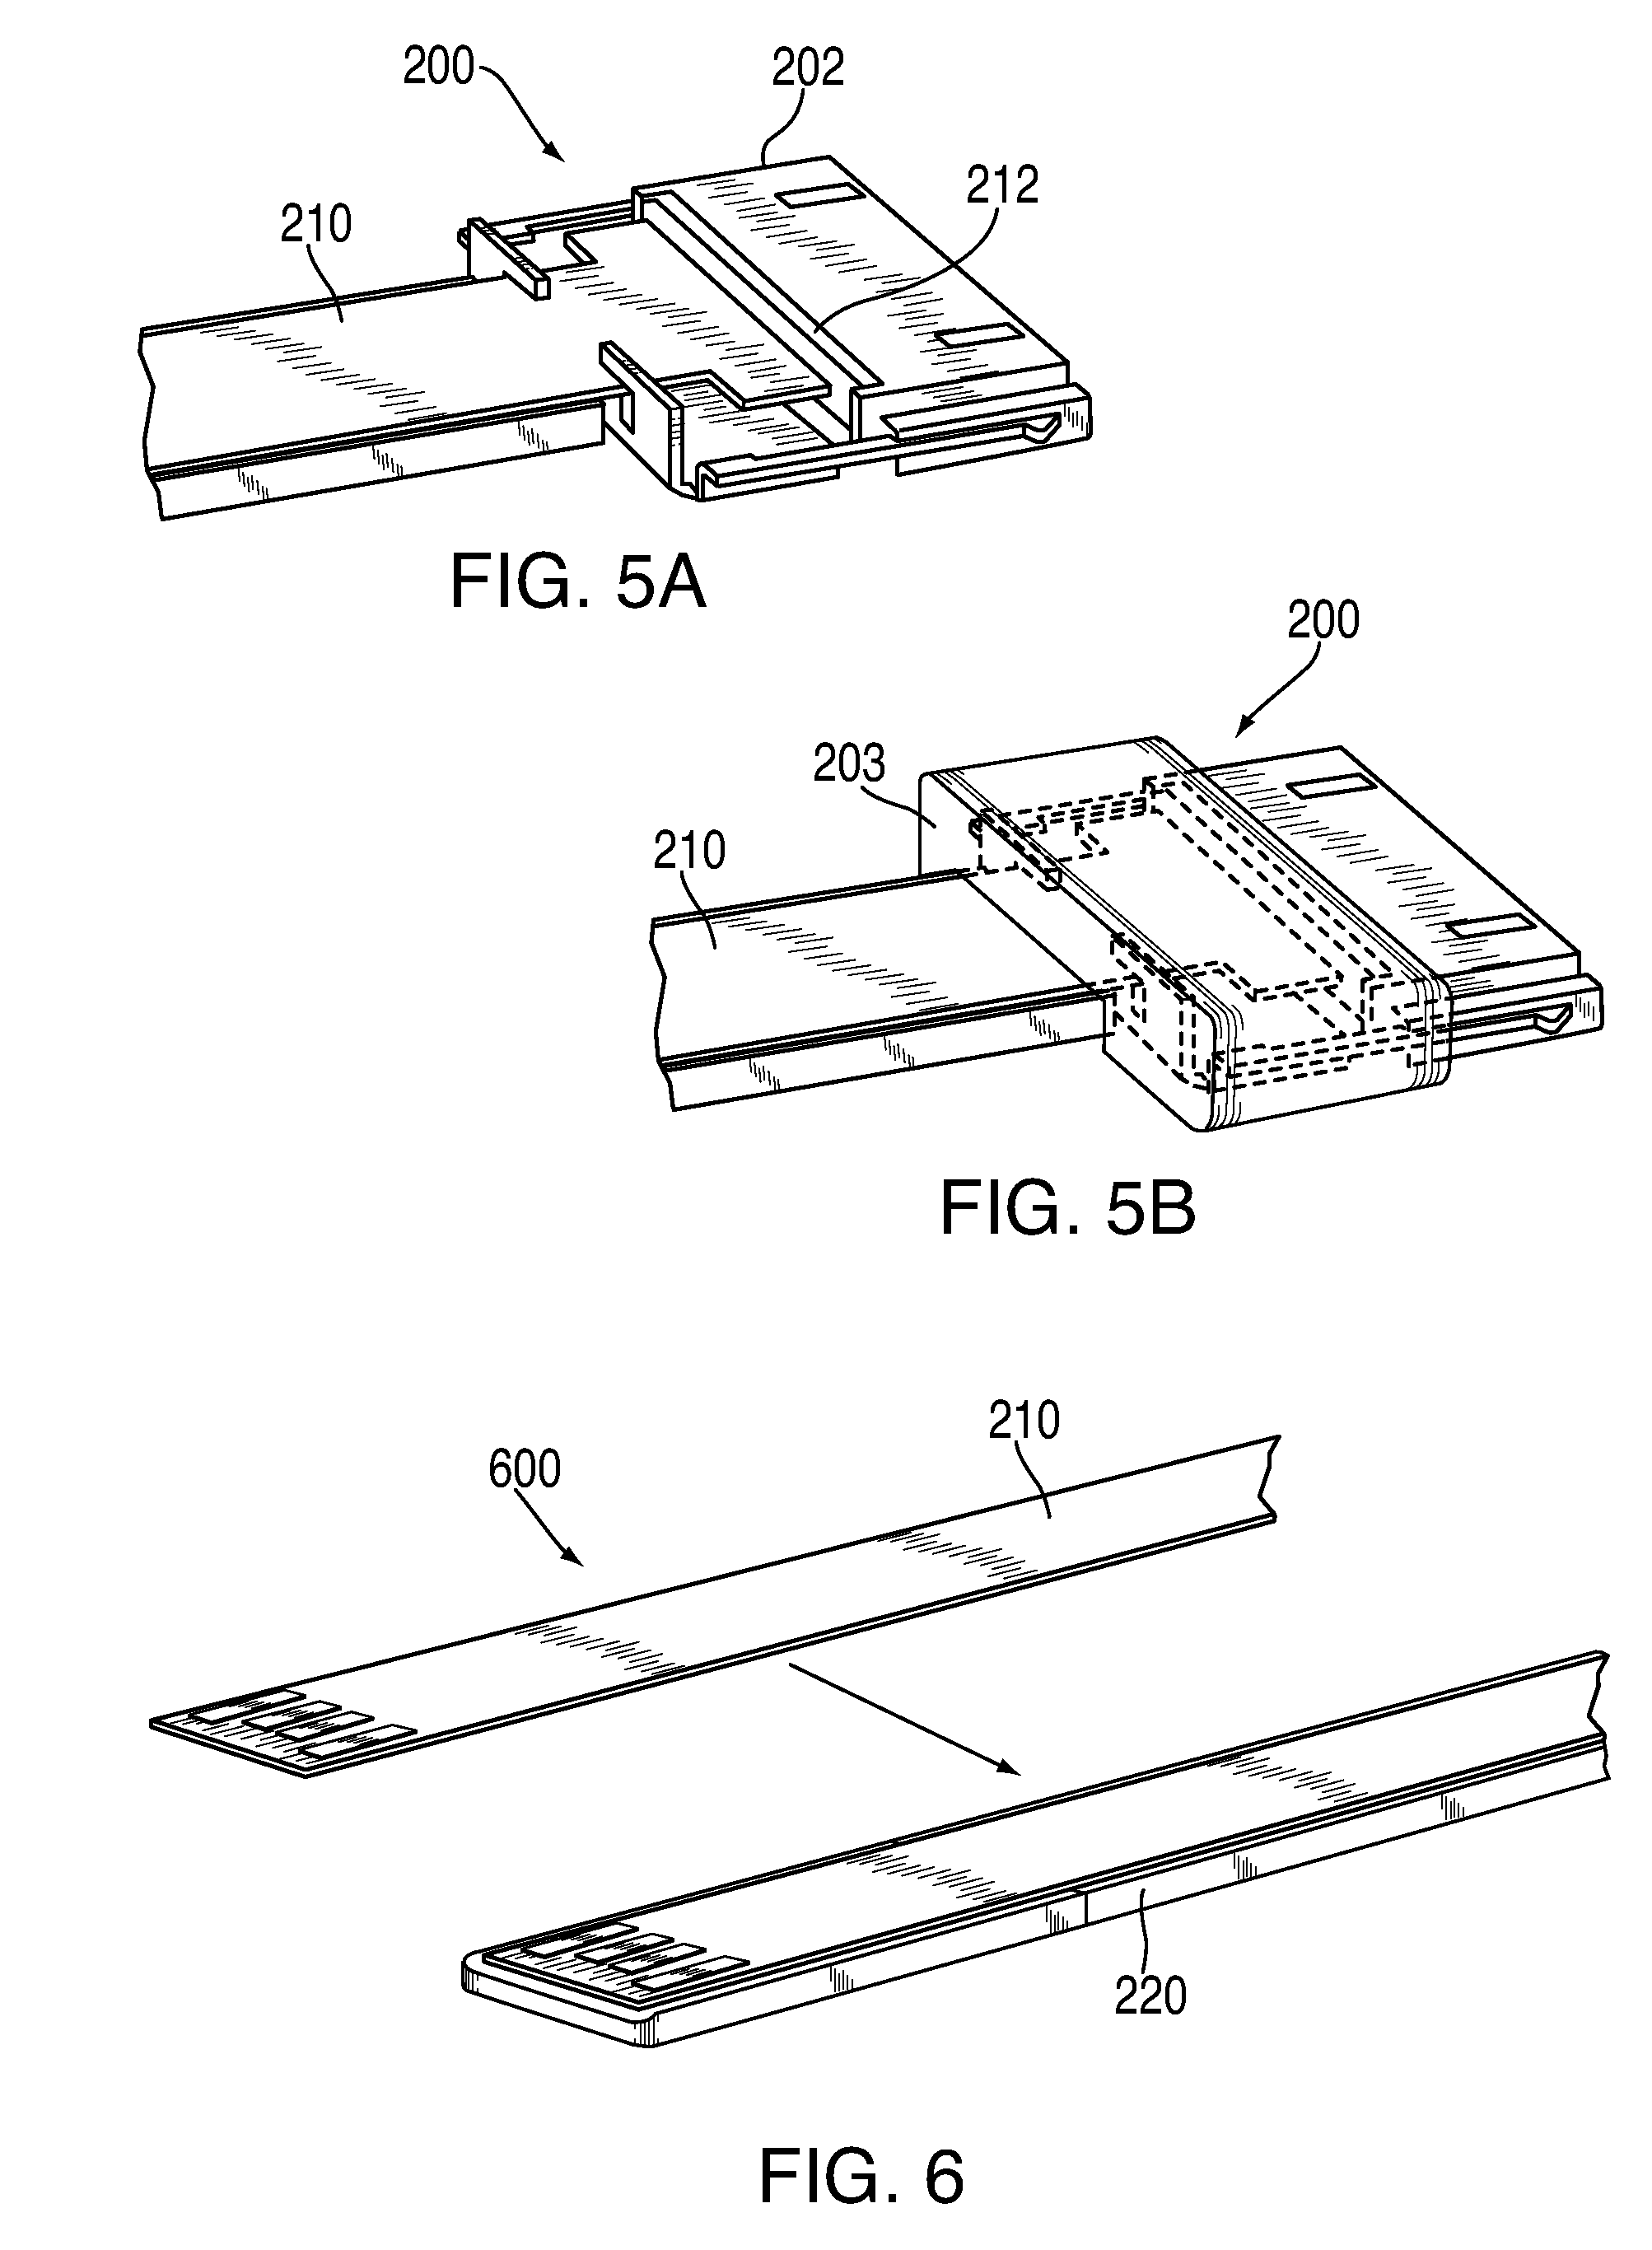 Flat cable for use with an electronic device